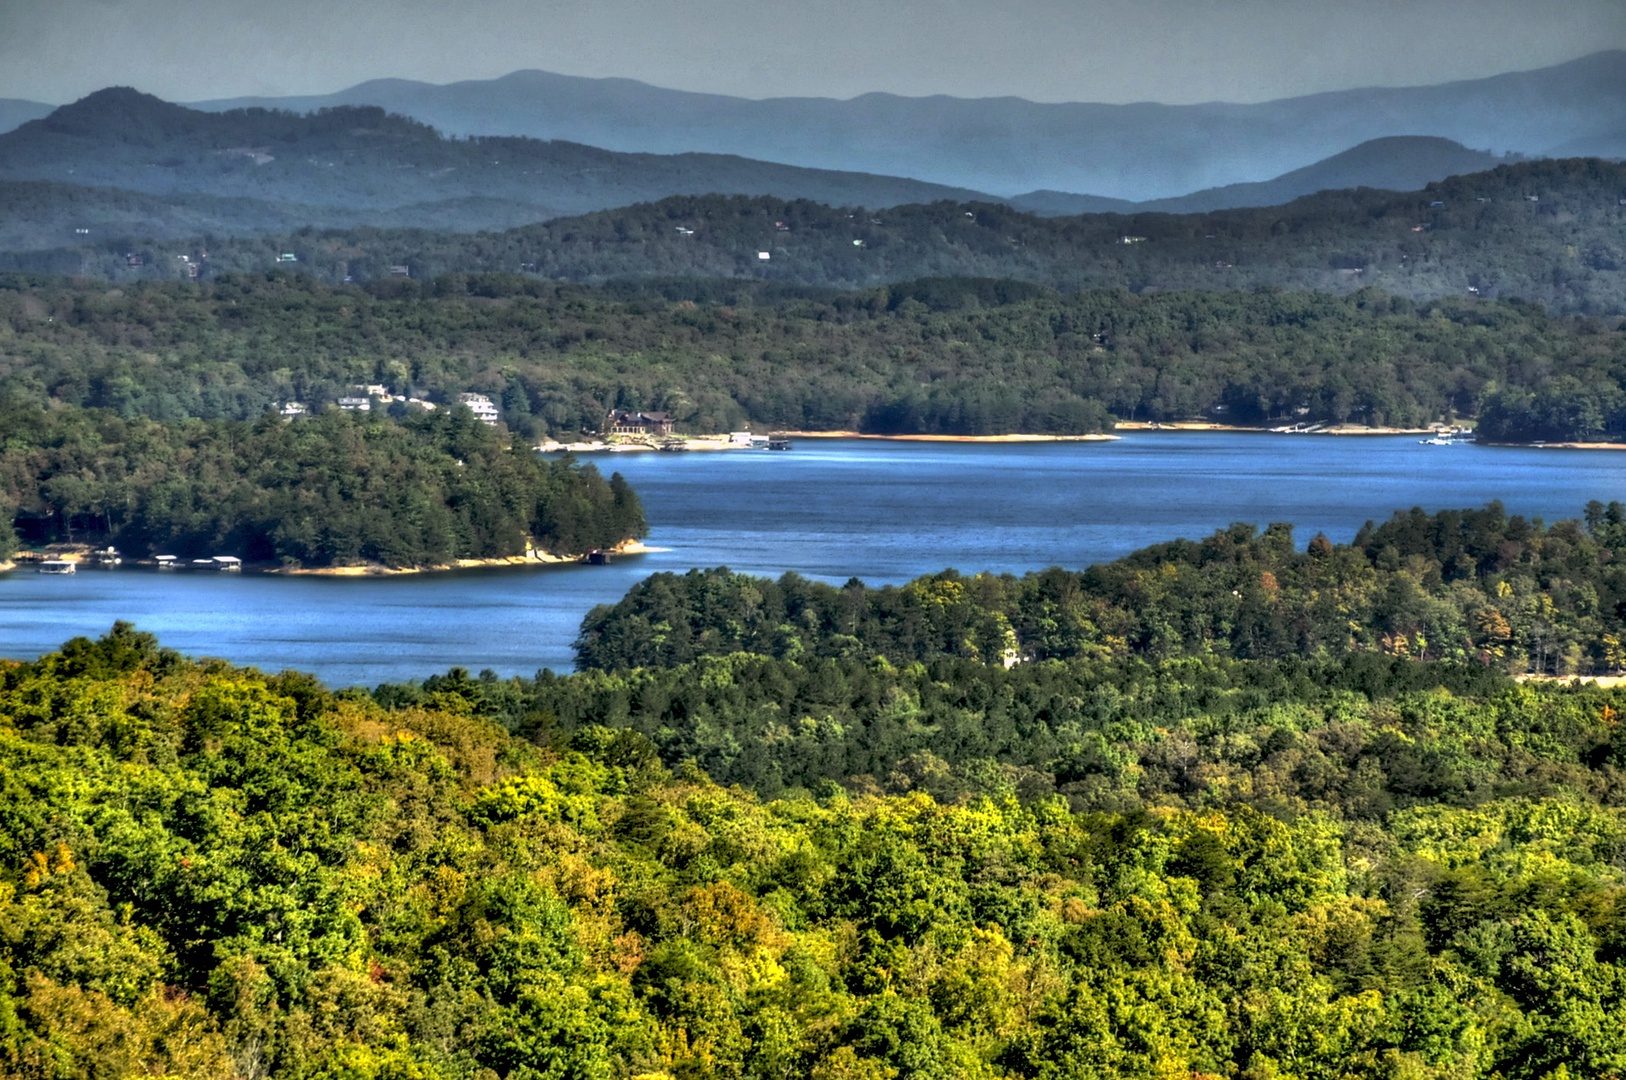 The Vue Over Blue Ridge- Long range lake and mountain views of the cabin